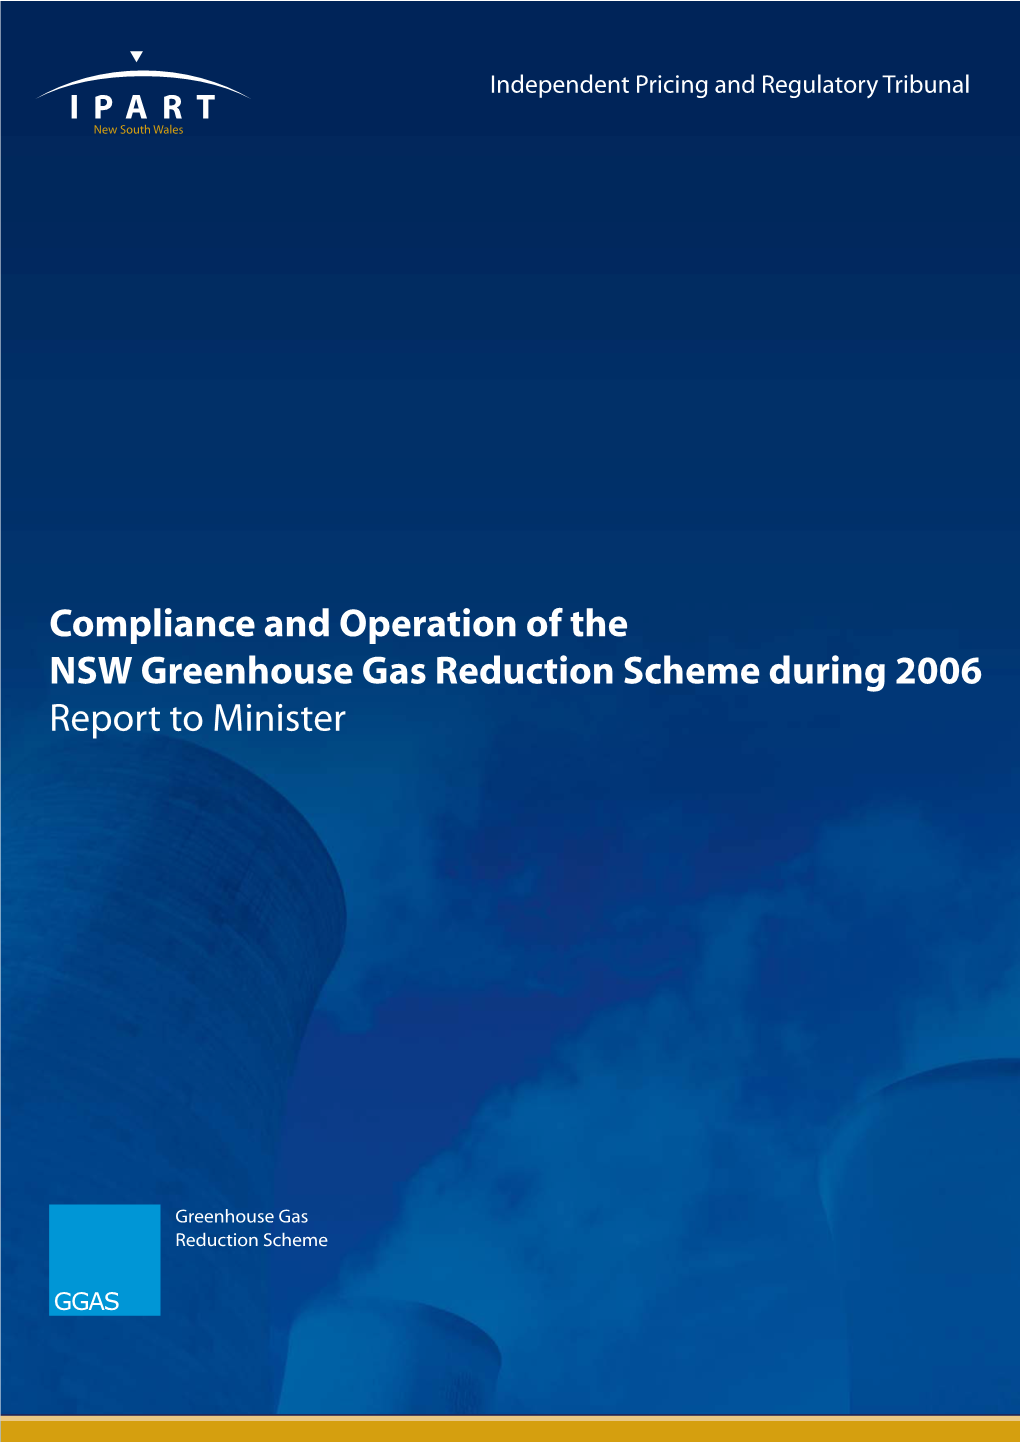 Operation and Compliance of the NSW